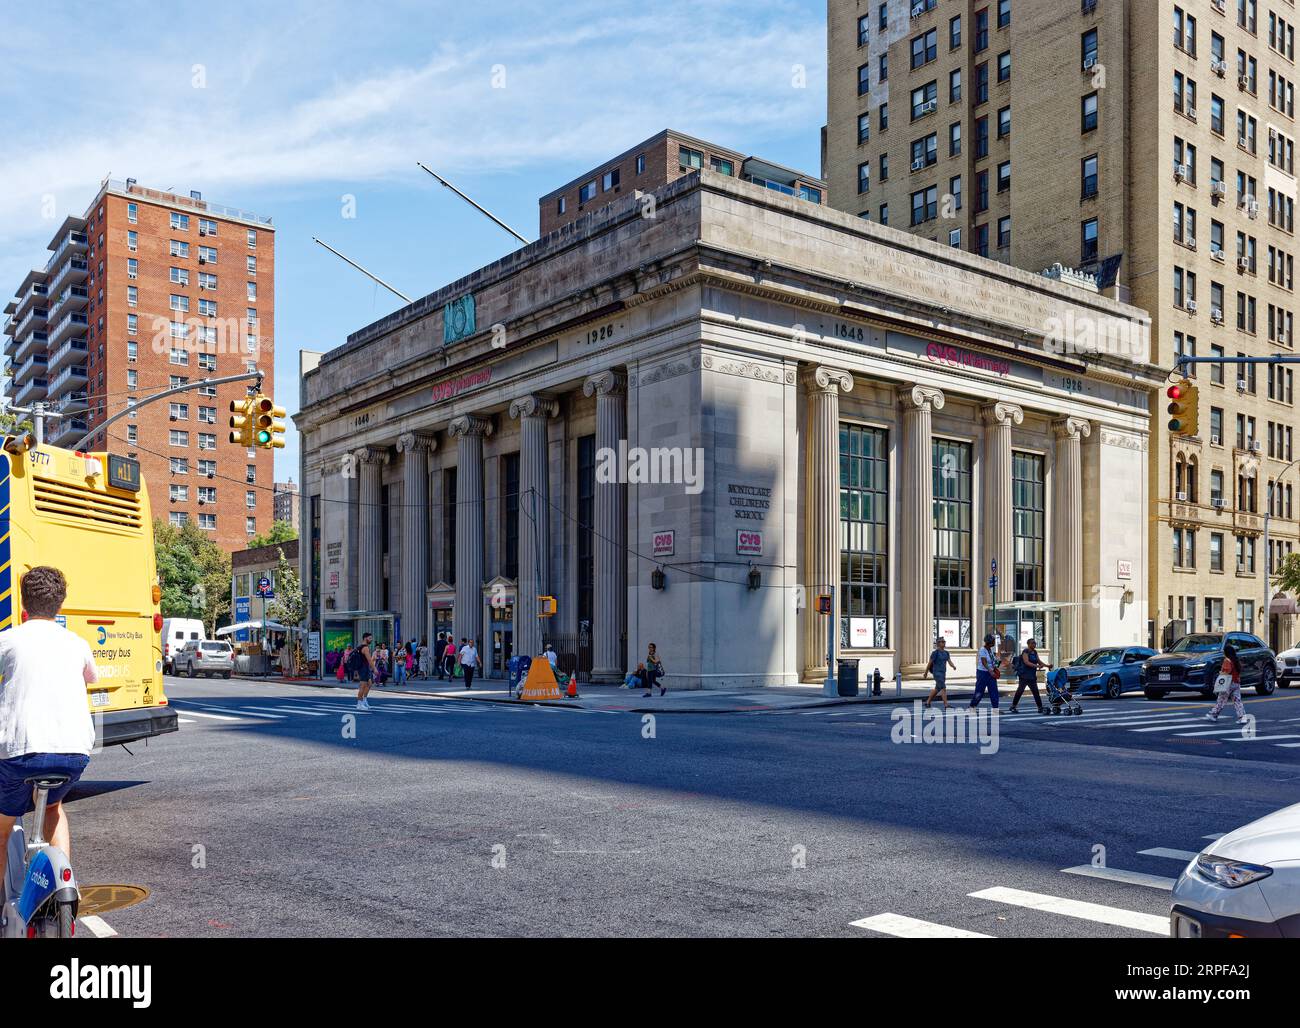 Upper West Side: Walker & Gillette designed East River Savings Bank in neo-Classical style. The 1926 landmark is now a school and drugstore. Stock Photo